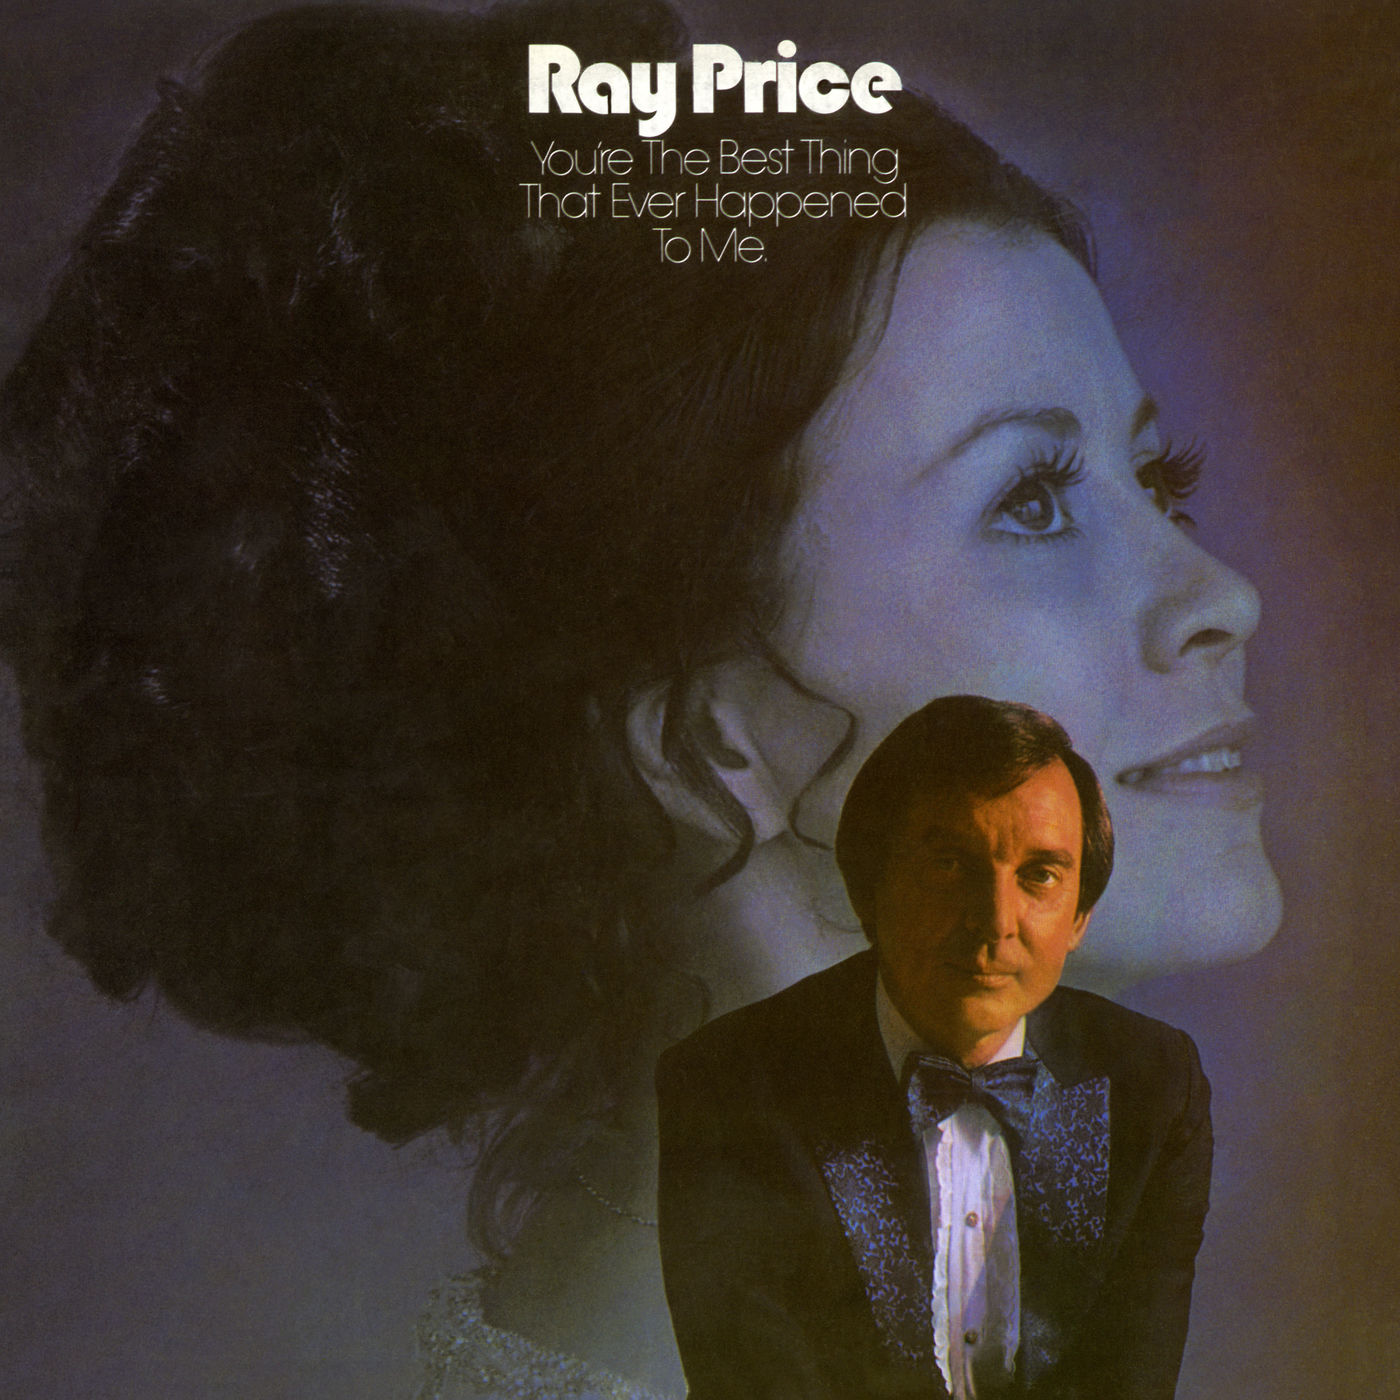 Ray Price – You’re the Best Thing that Ever Happened to Me